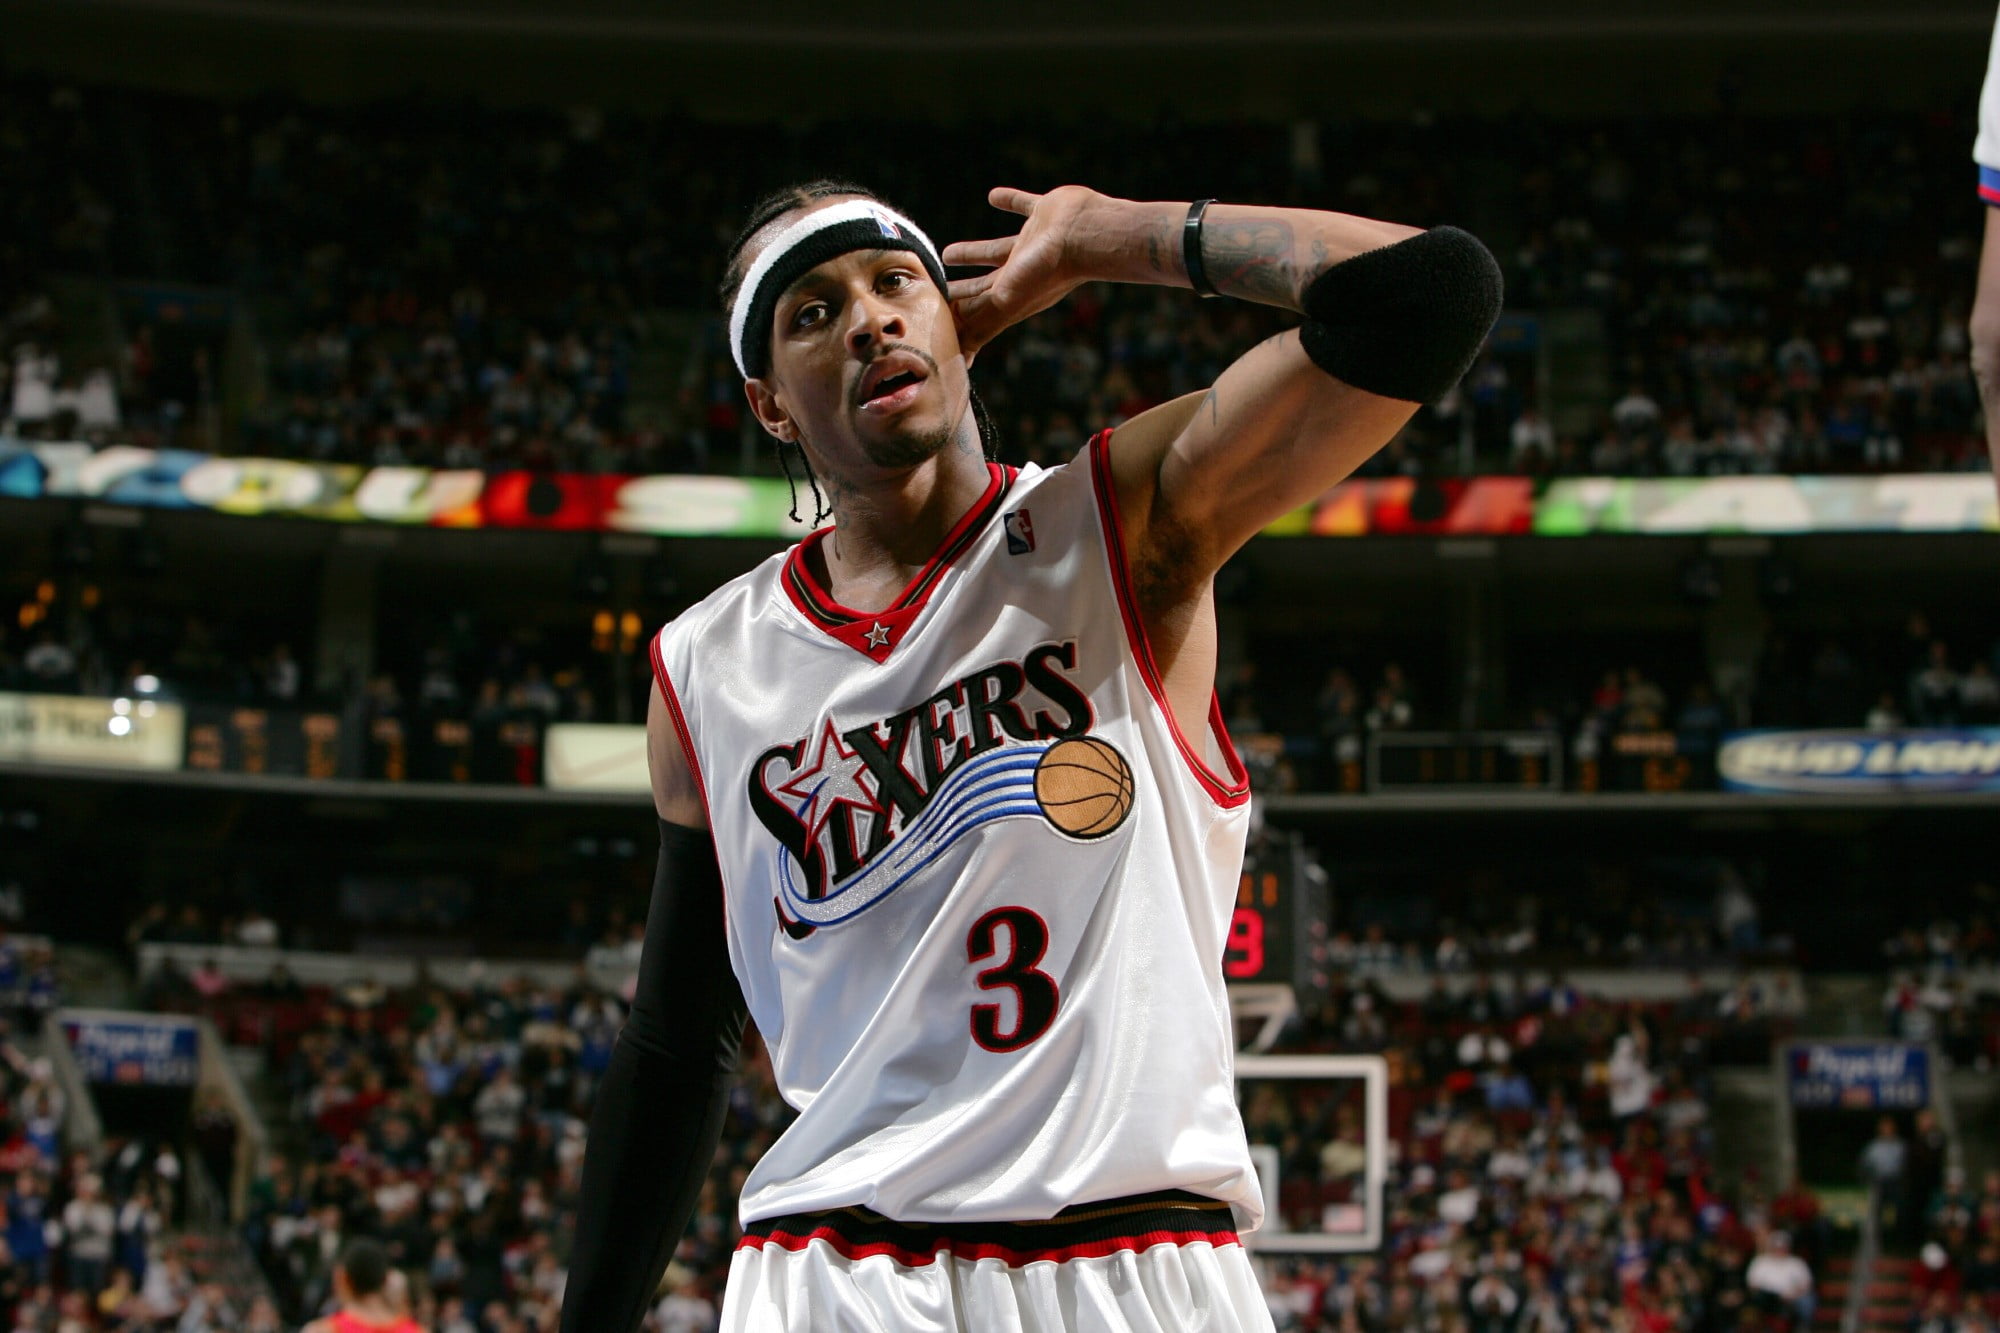 allen iverson red and white jersey